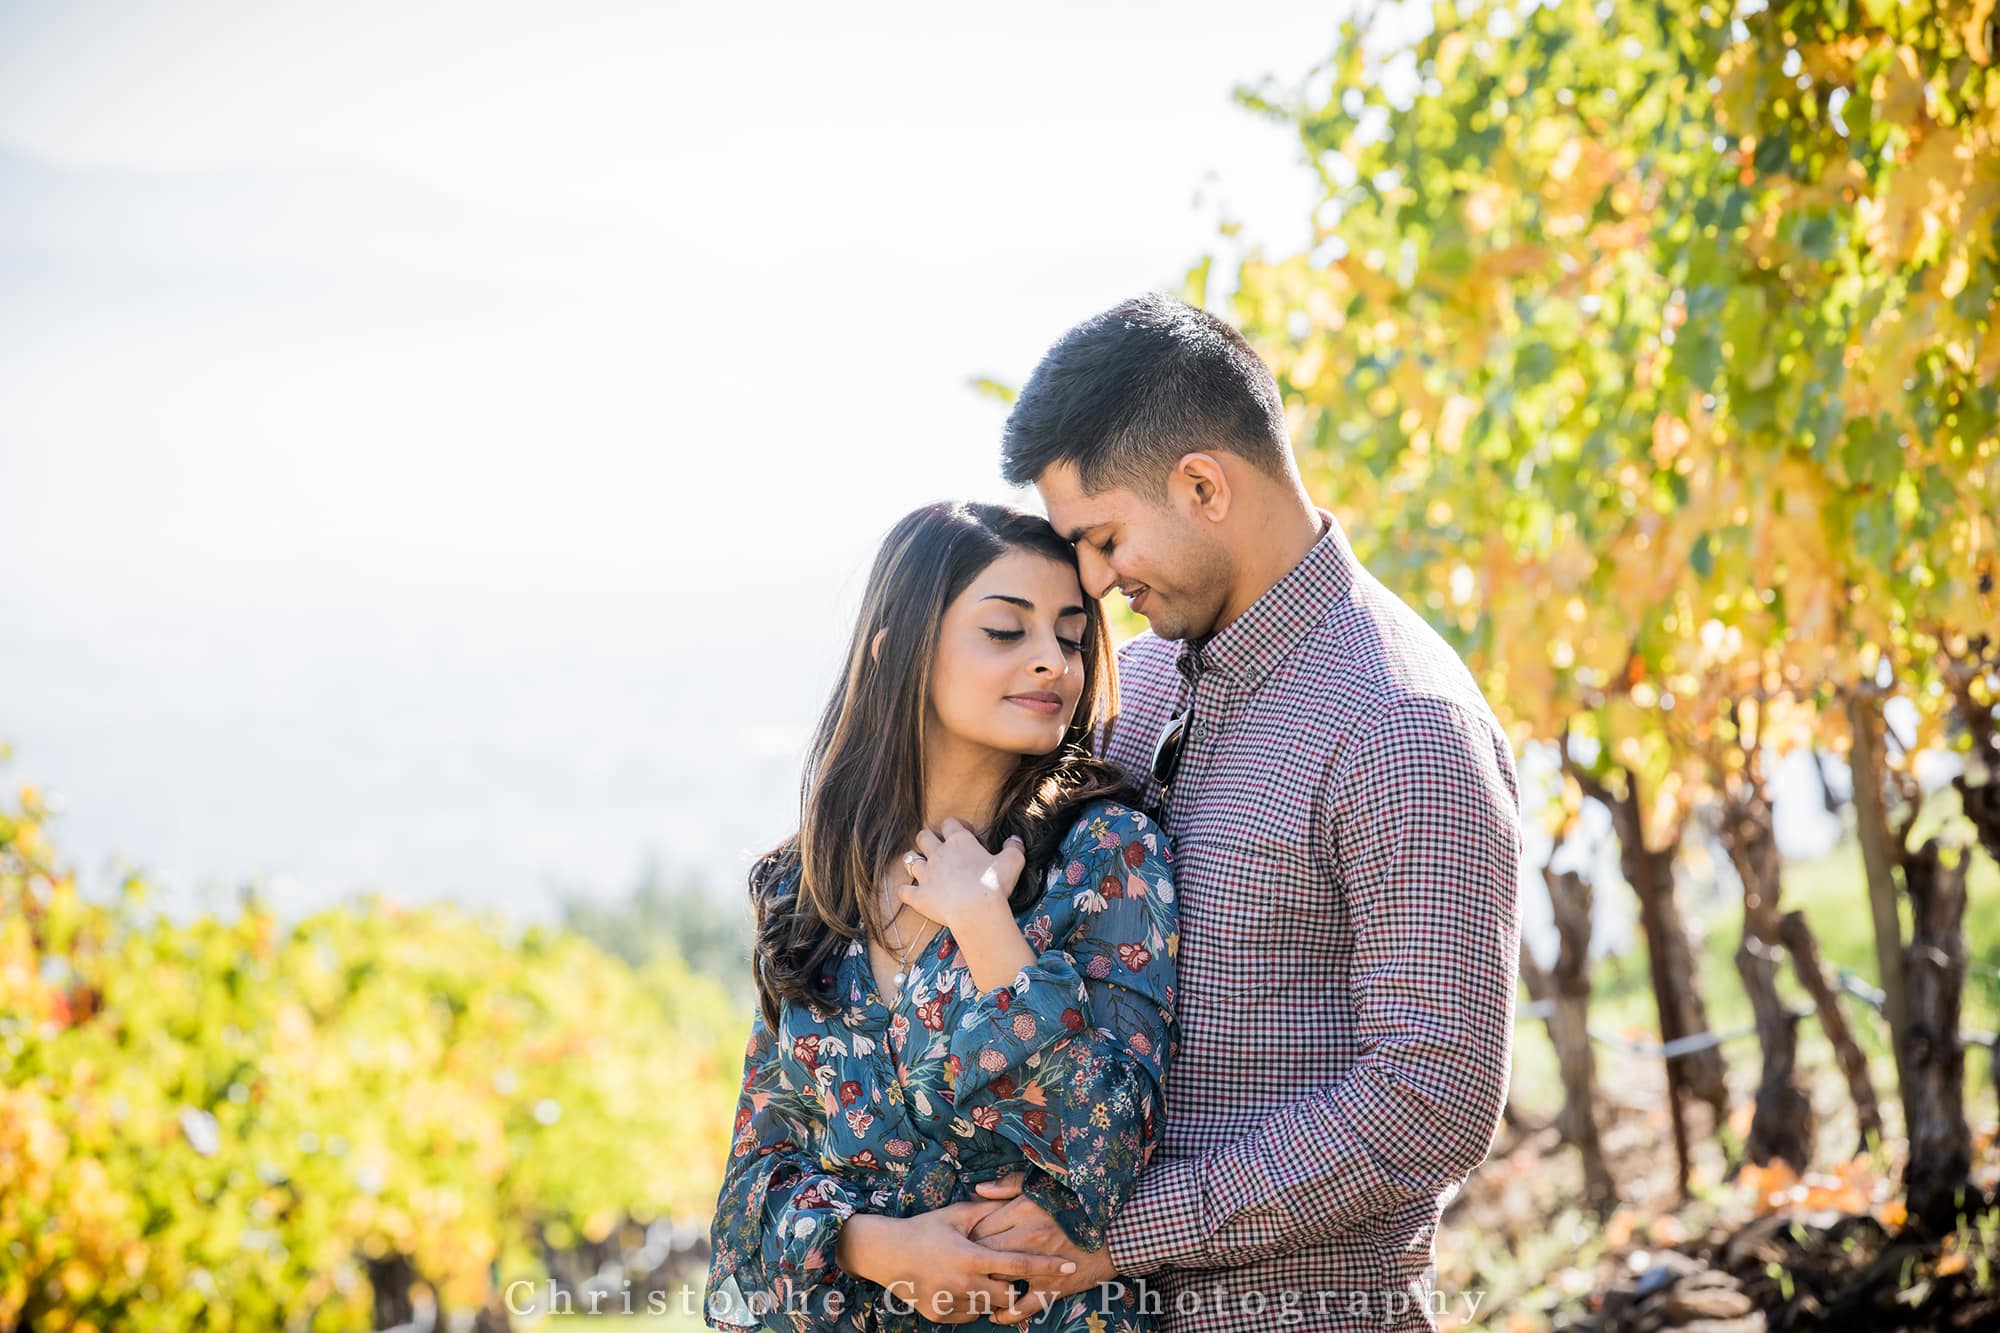 Proposal ideas in the Napa Valley - Newton Winery, St Helena, CA